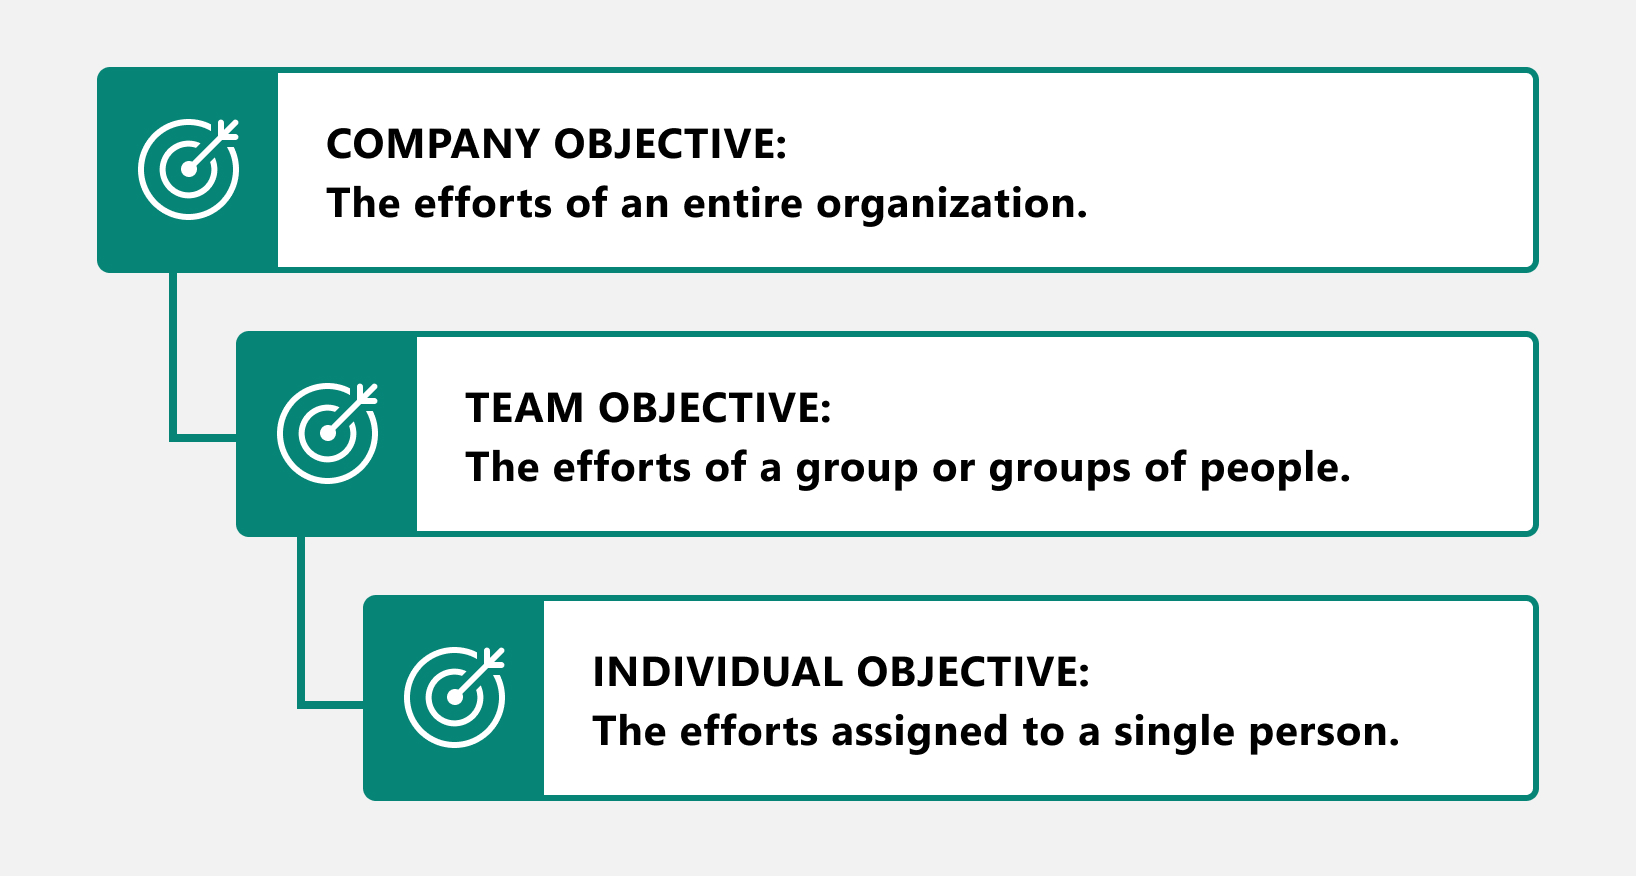 Image showing the Company, Team, and Individual objectives.